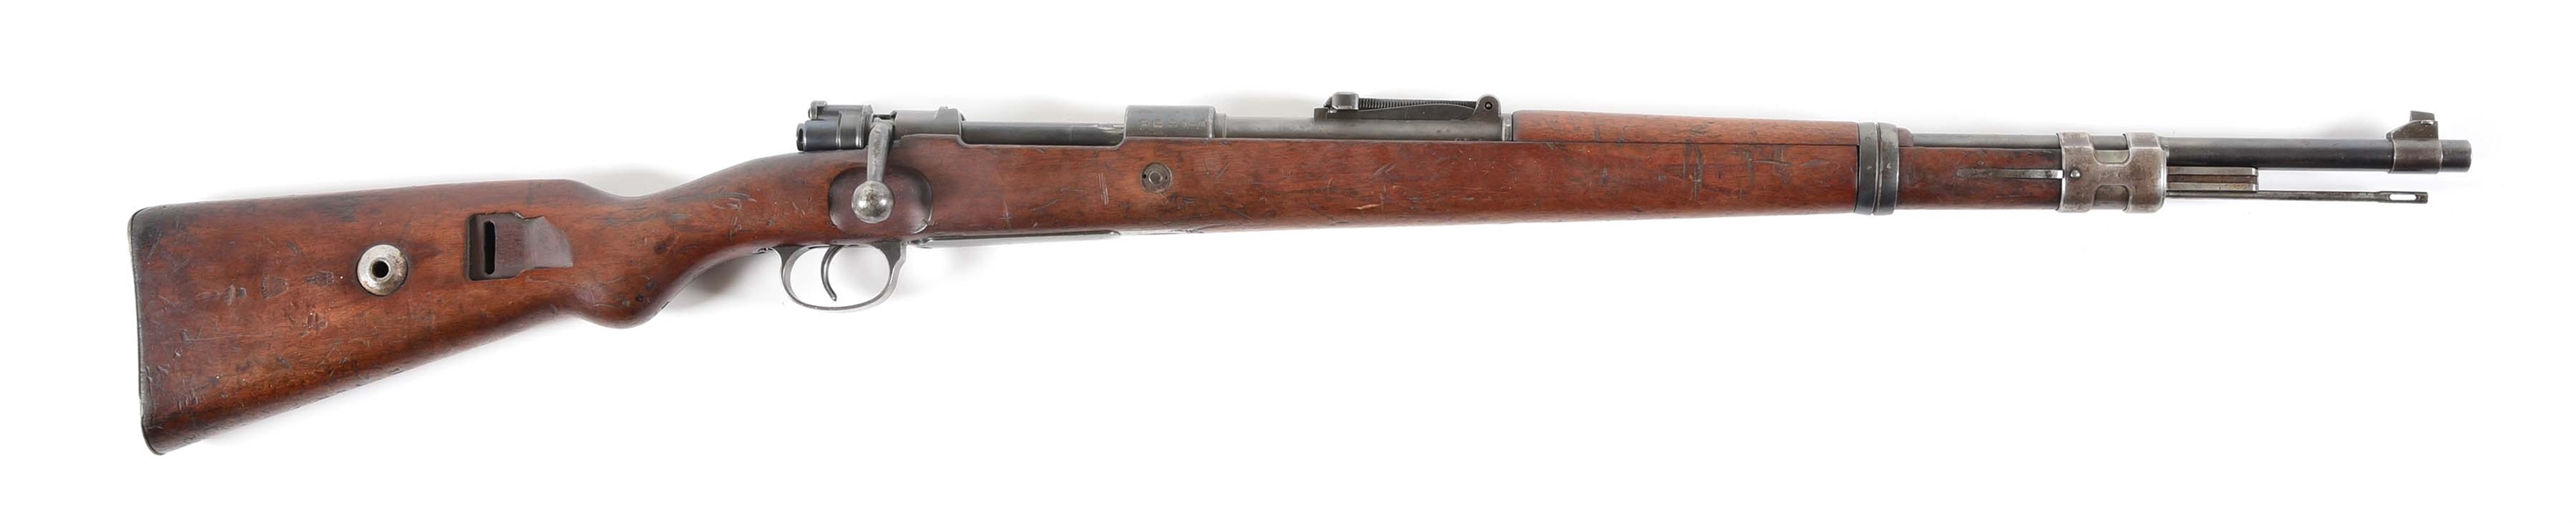 (C) EXCEPTIONALLY SCARCE AND MATCHING J.P. SAUER & SOHN "S/147" CODE "K" DATE K98 BOLT ACTION RIFLE.